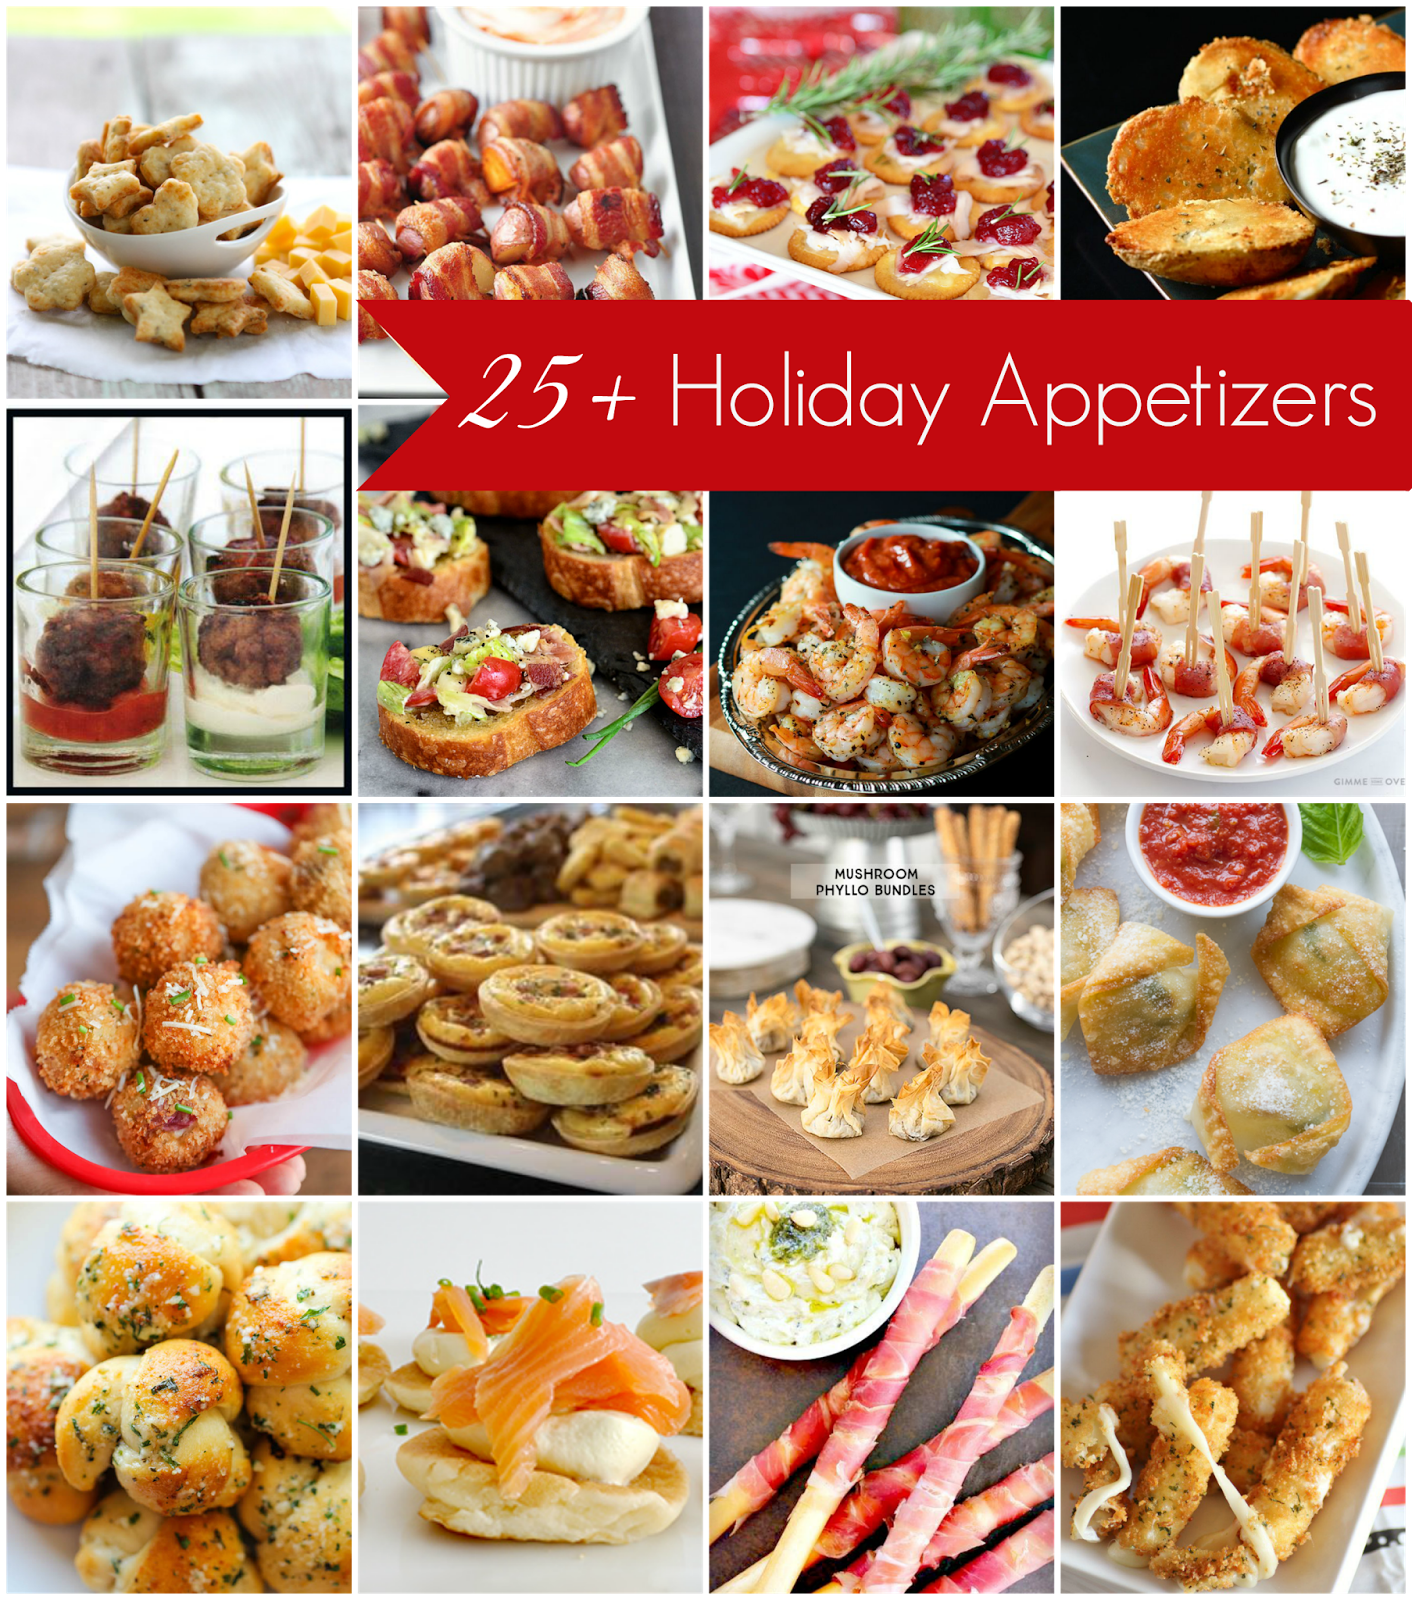 Ioanna's-Notebook-25-plus-holiday-appetizers